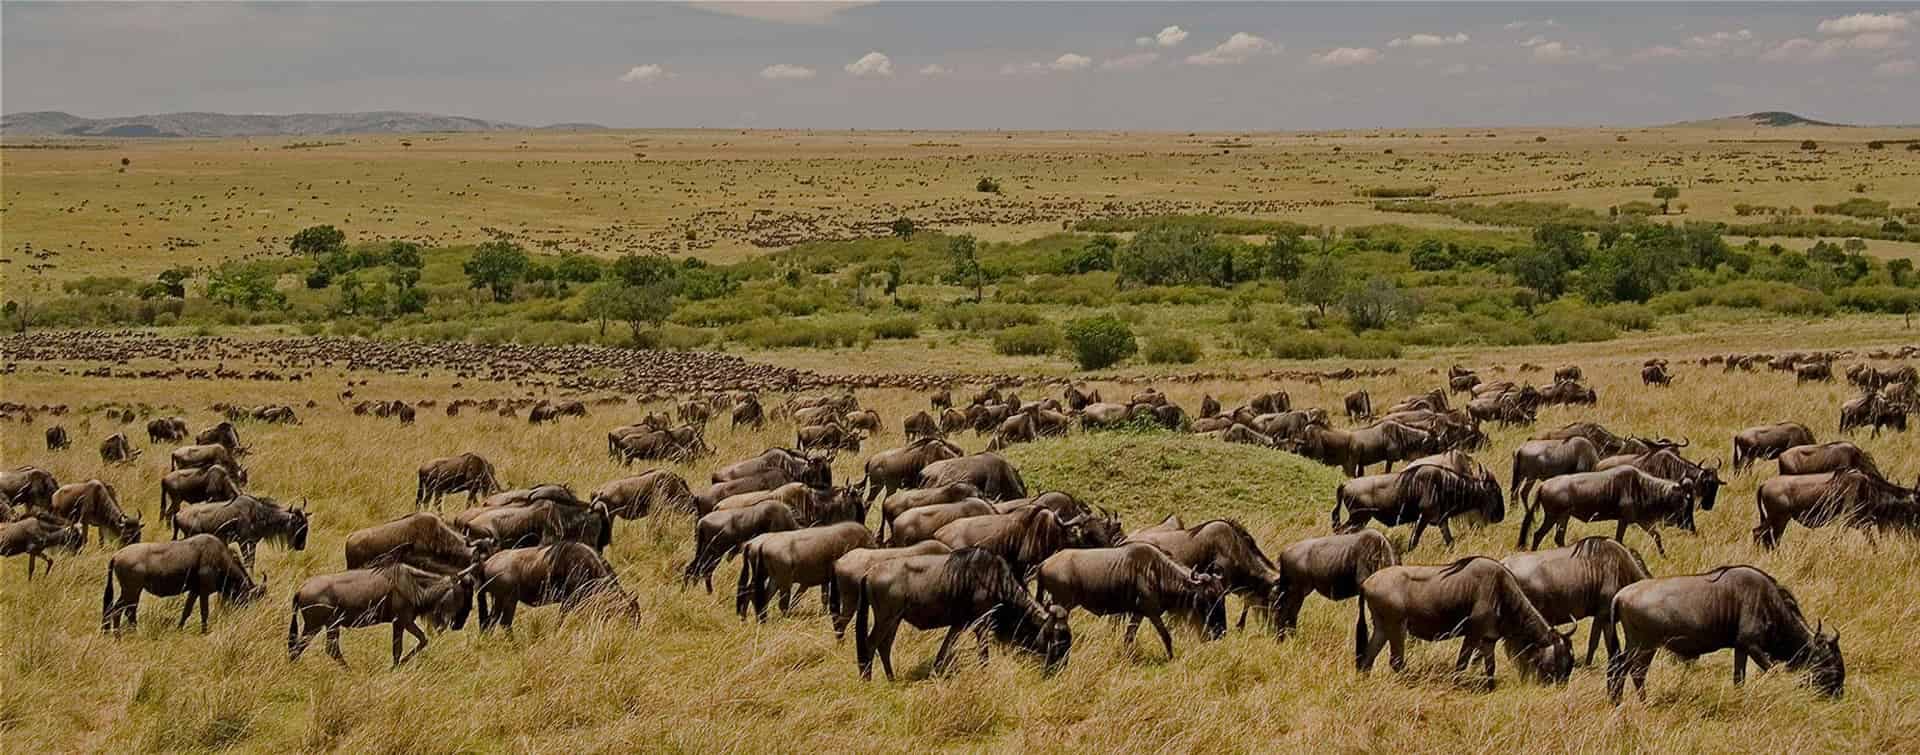 The Ultimate Guide to the Great Wildebeest Migration